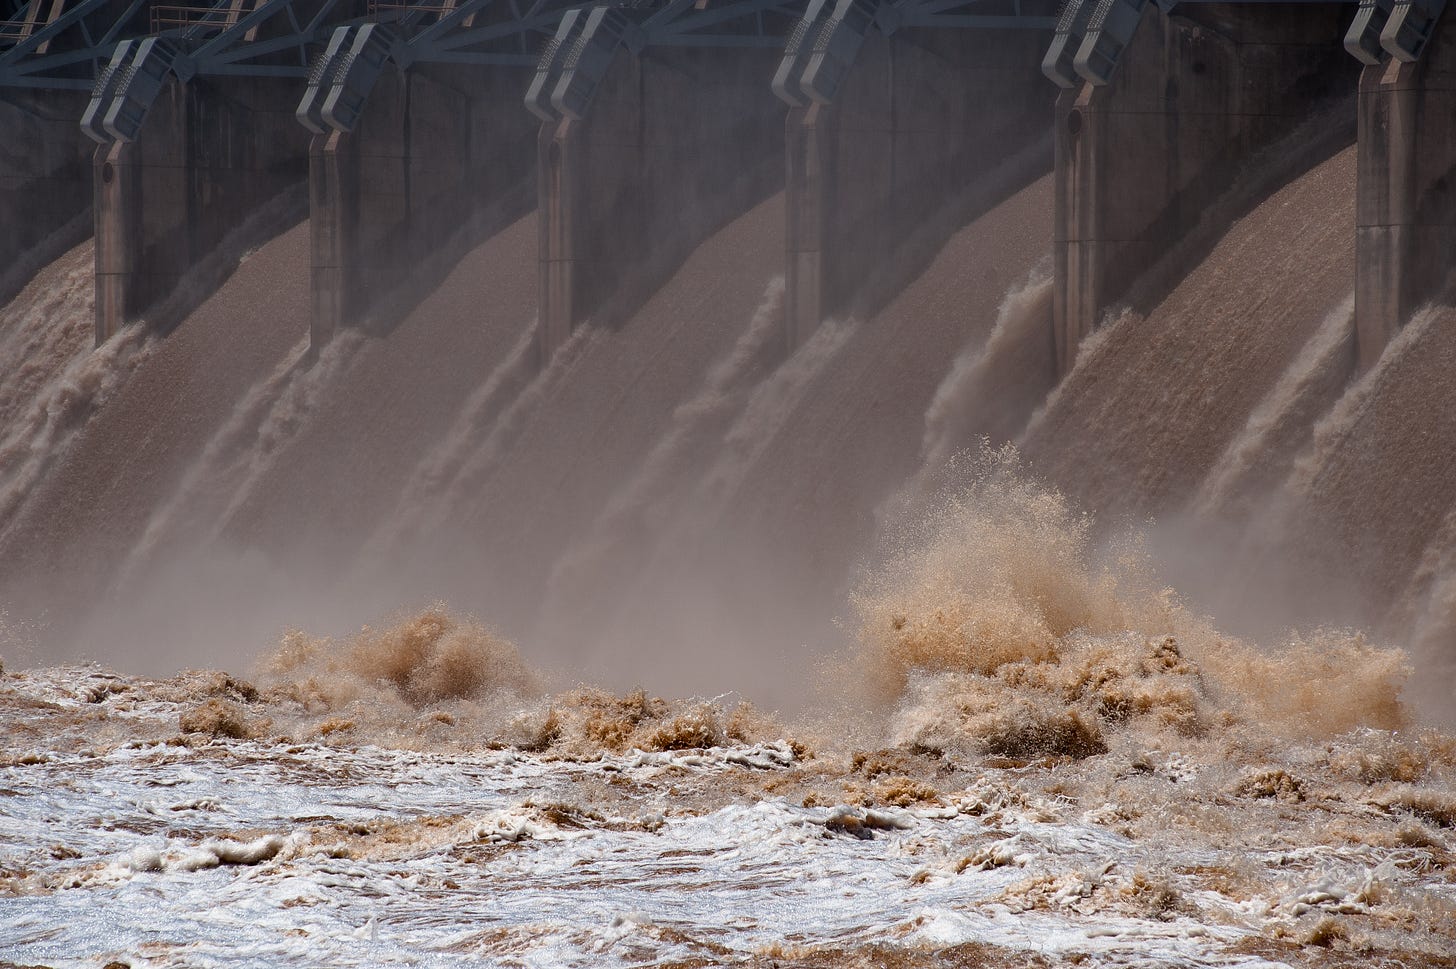 Seen from just downstream, the frothing, muddy waters of Keystone Reservoir roar through the gates of Keystone Dam between massive concrete piers. The water crashes into the churning Arkansas River in a furious explosion.